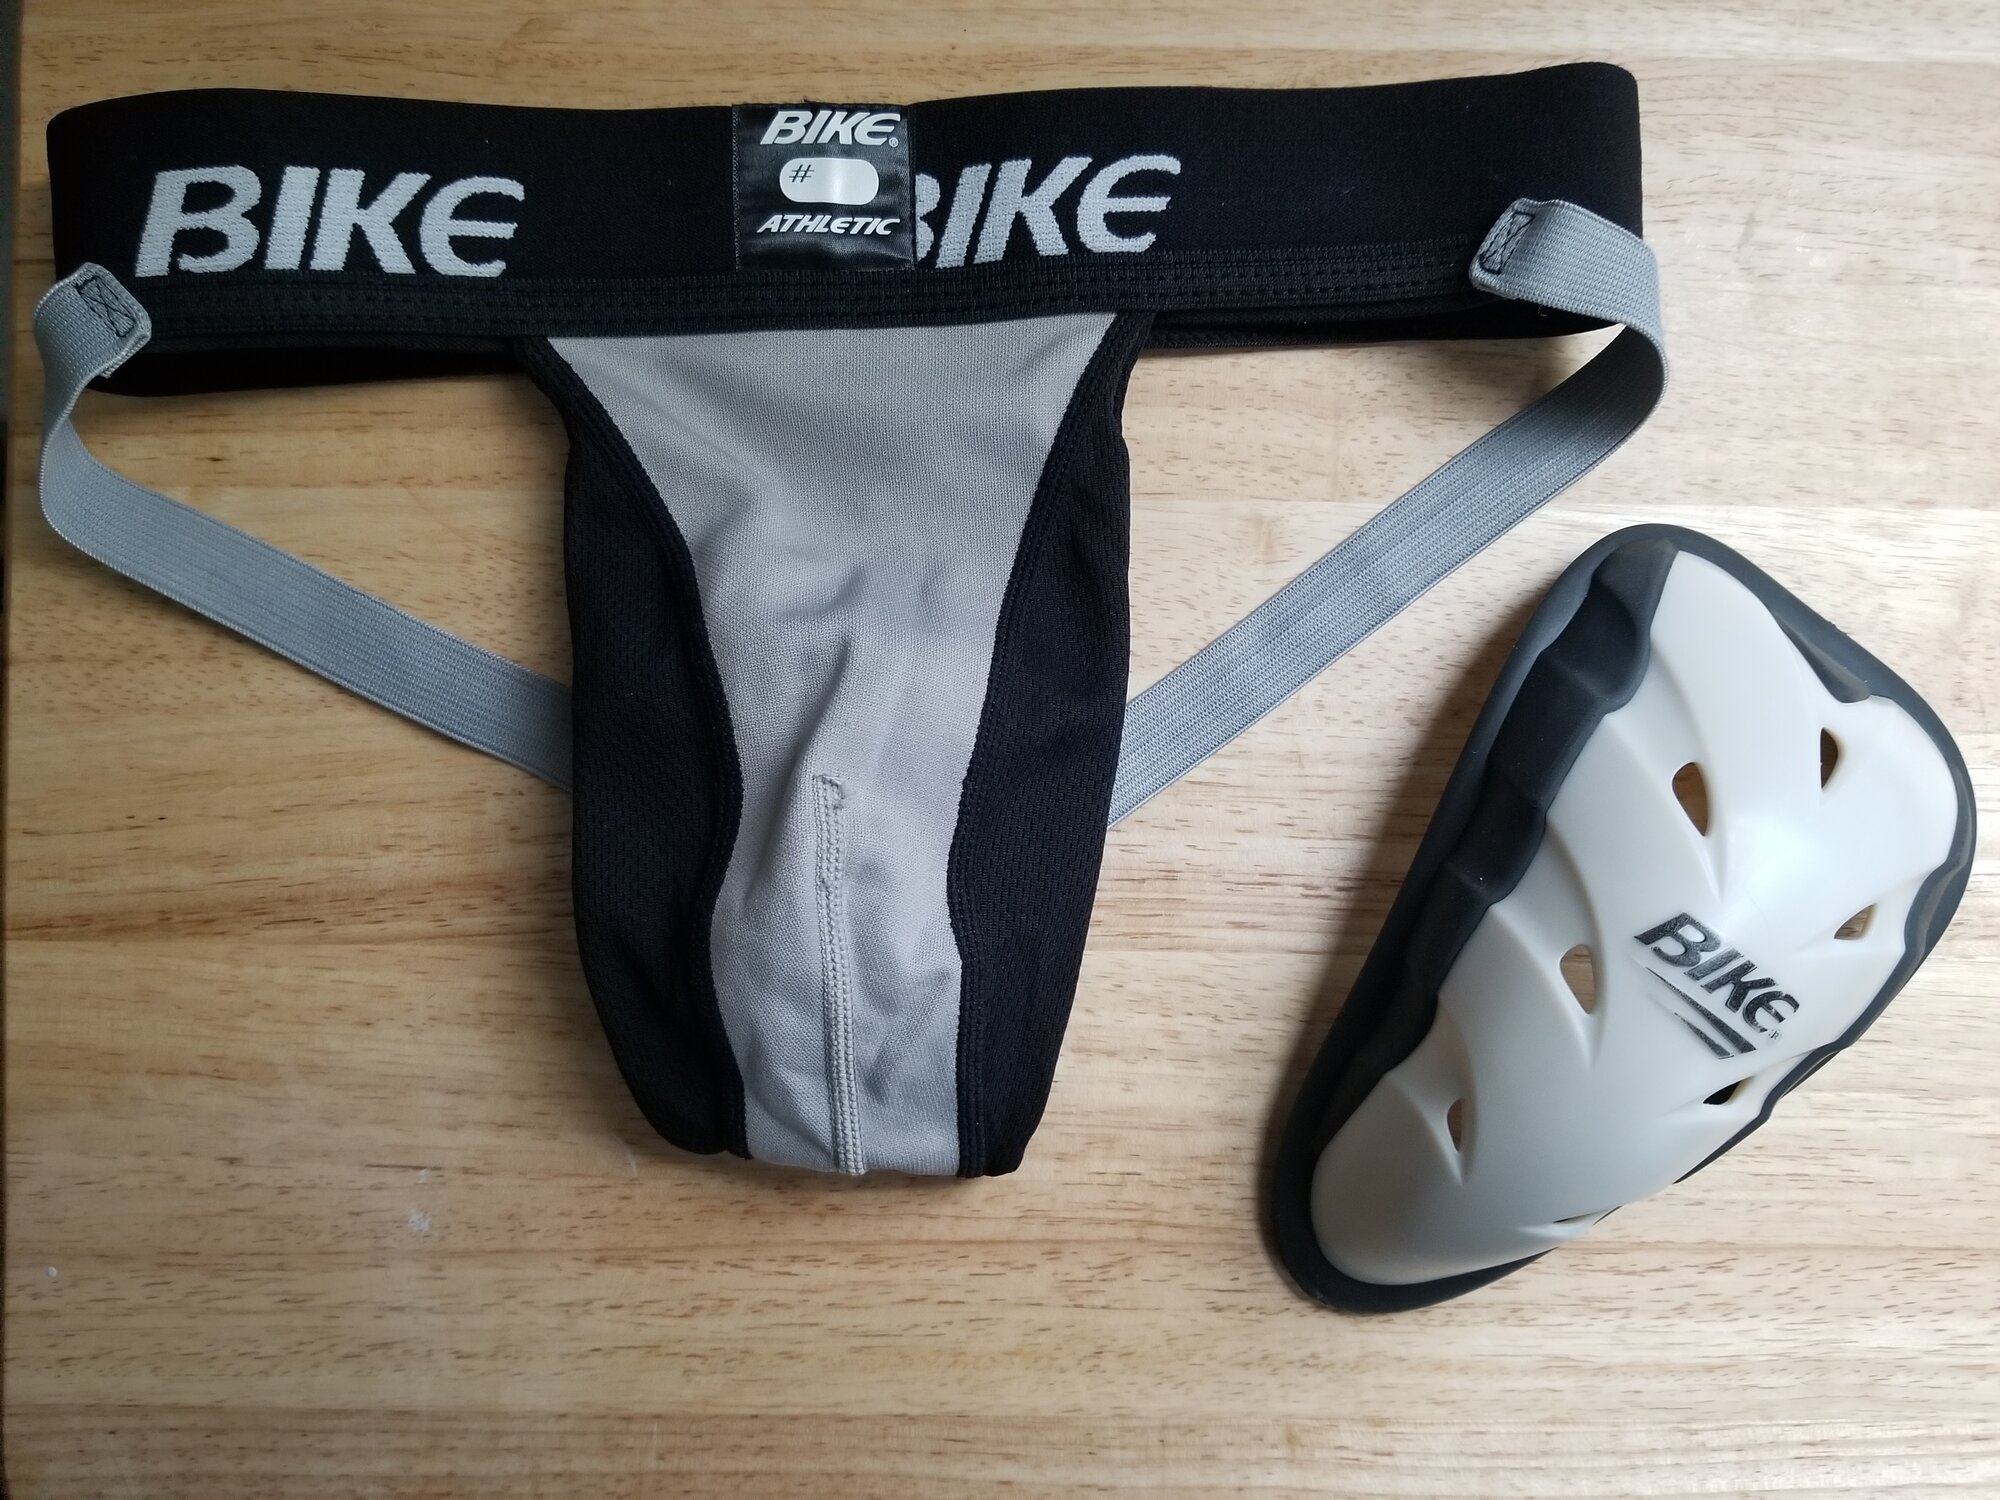 Bike Performance Elite with Proflex Max cup